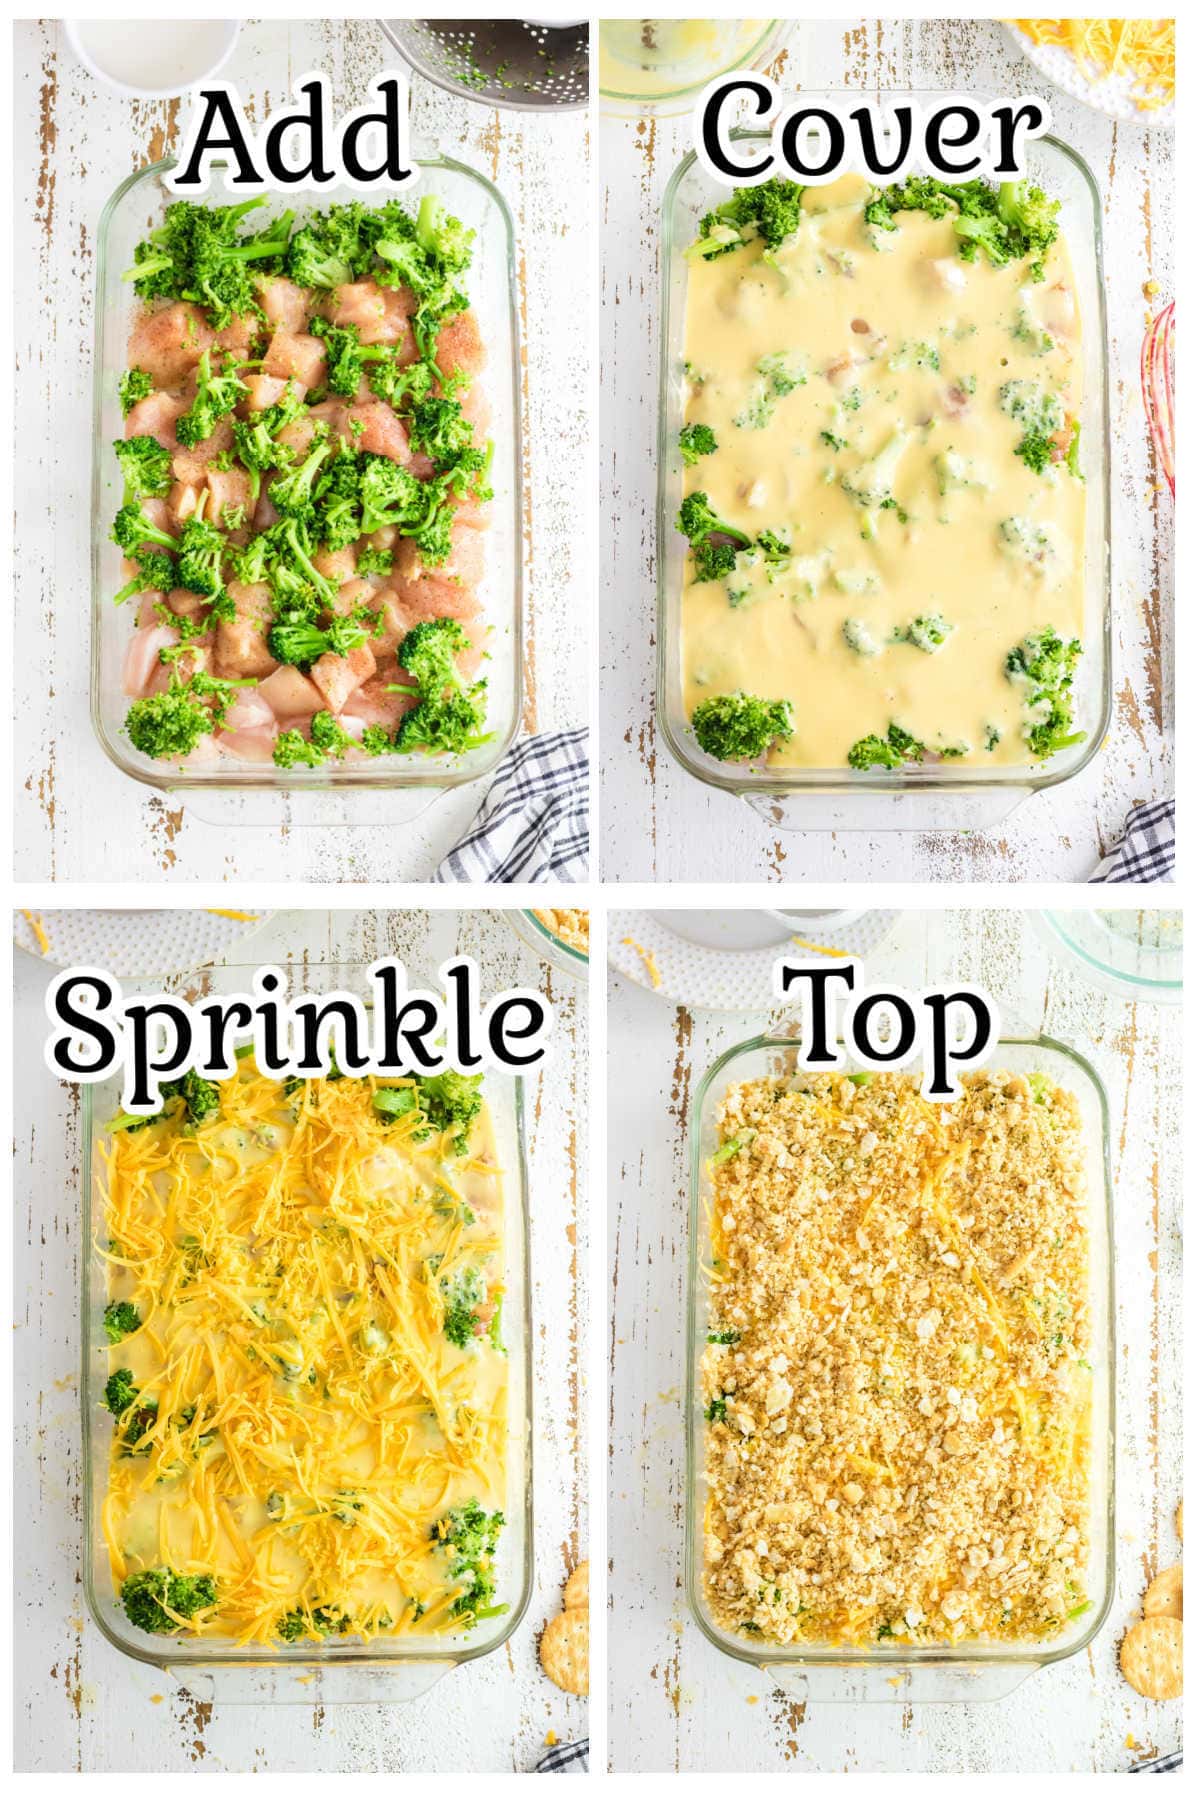 Step by step images for making broccoli cheddar chicken.